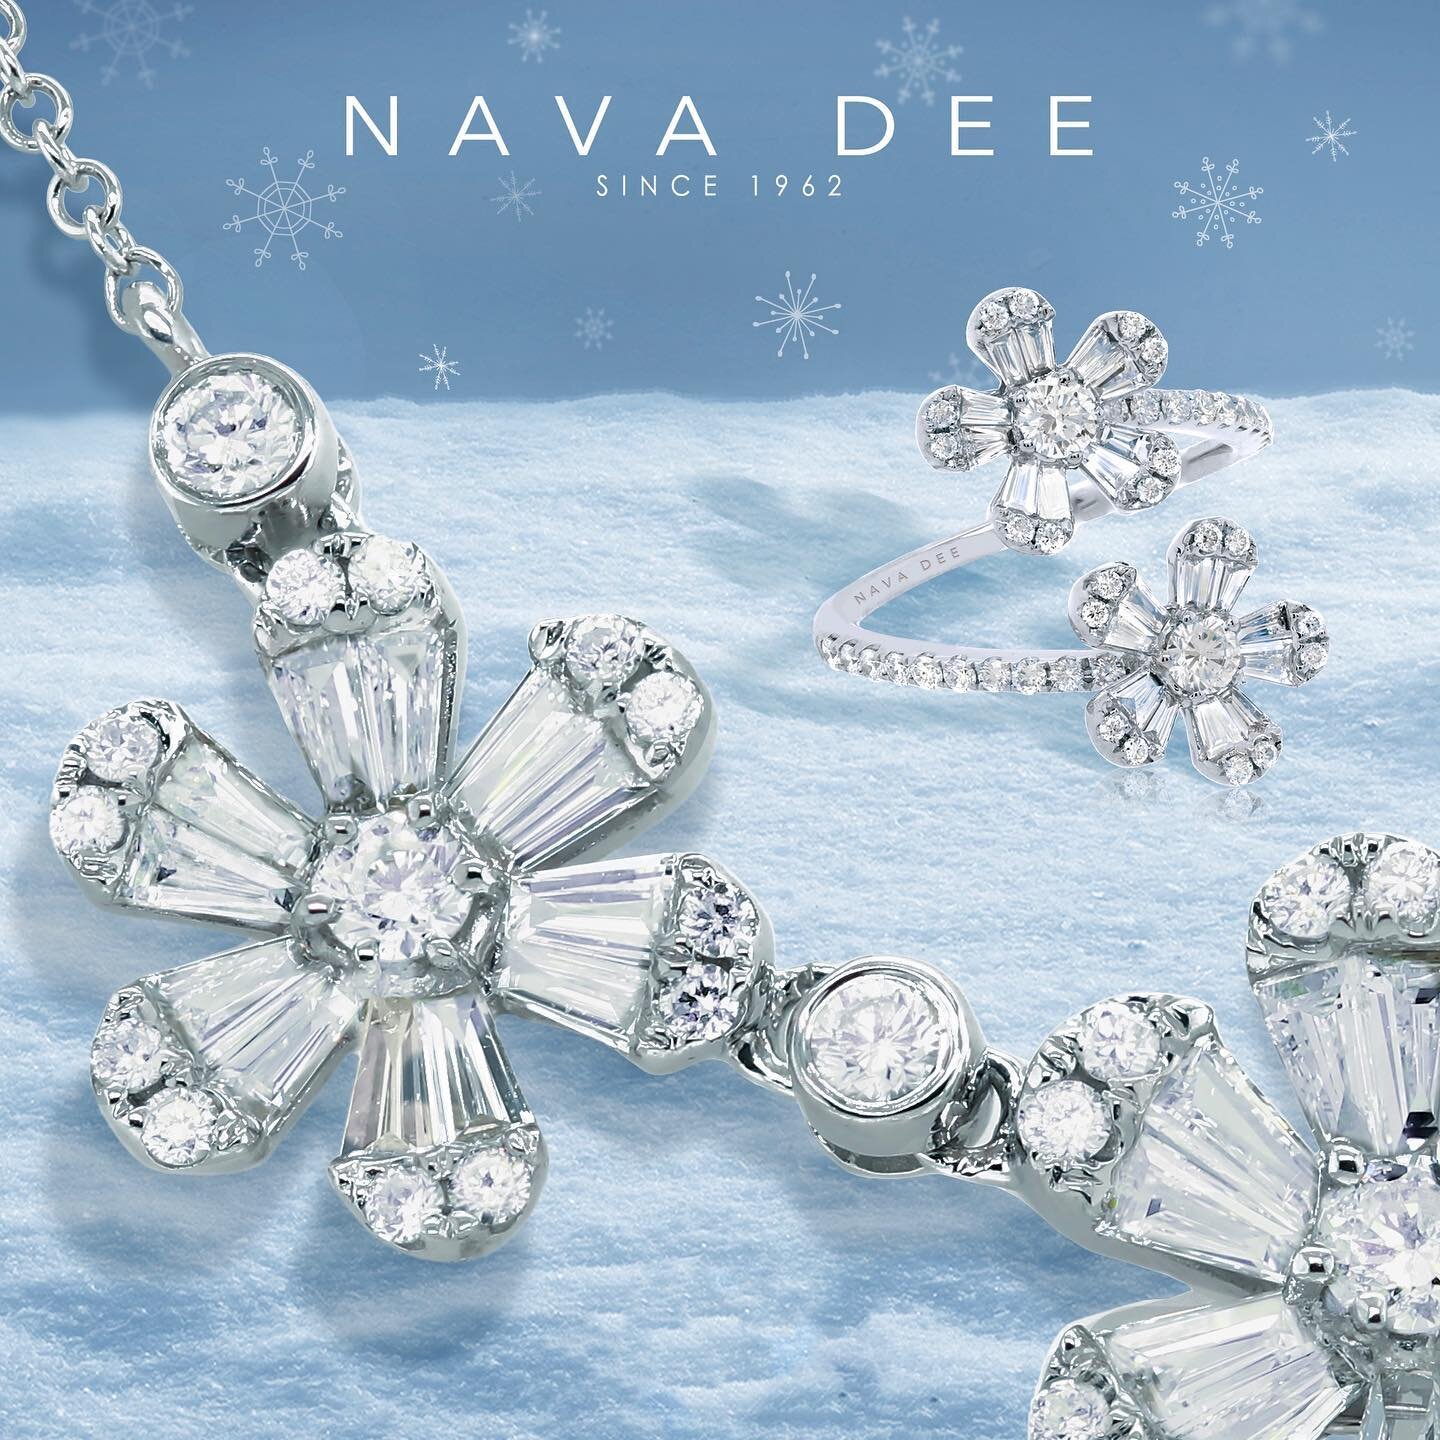 Enter our Winter Wonderland ❄️❄️❄️ A dazzling variety of White Diamond shapes and sizes available now #navadee #flowers